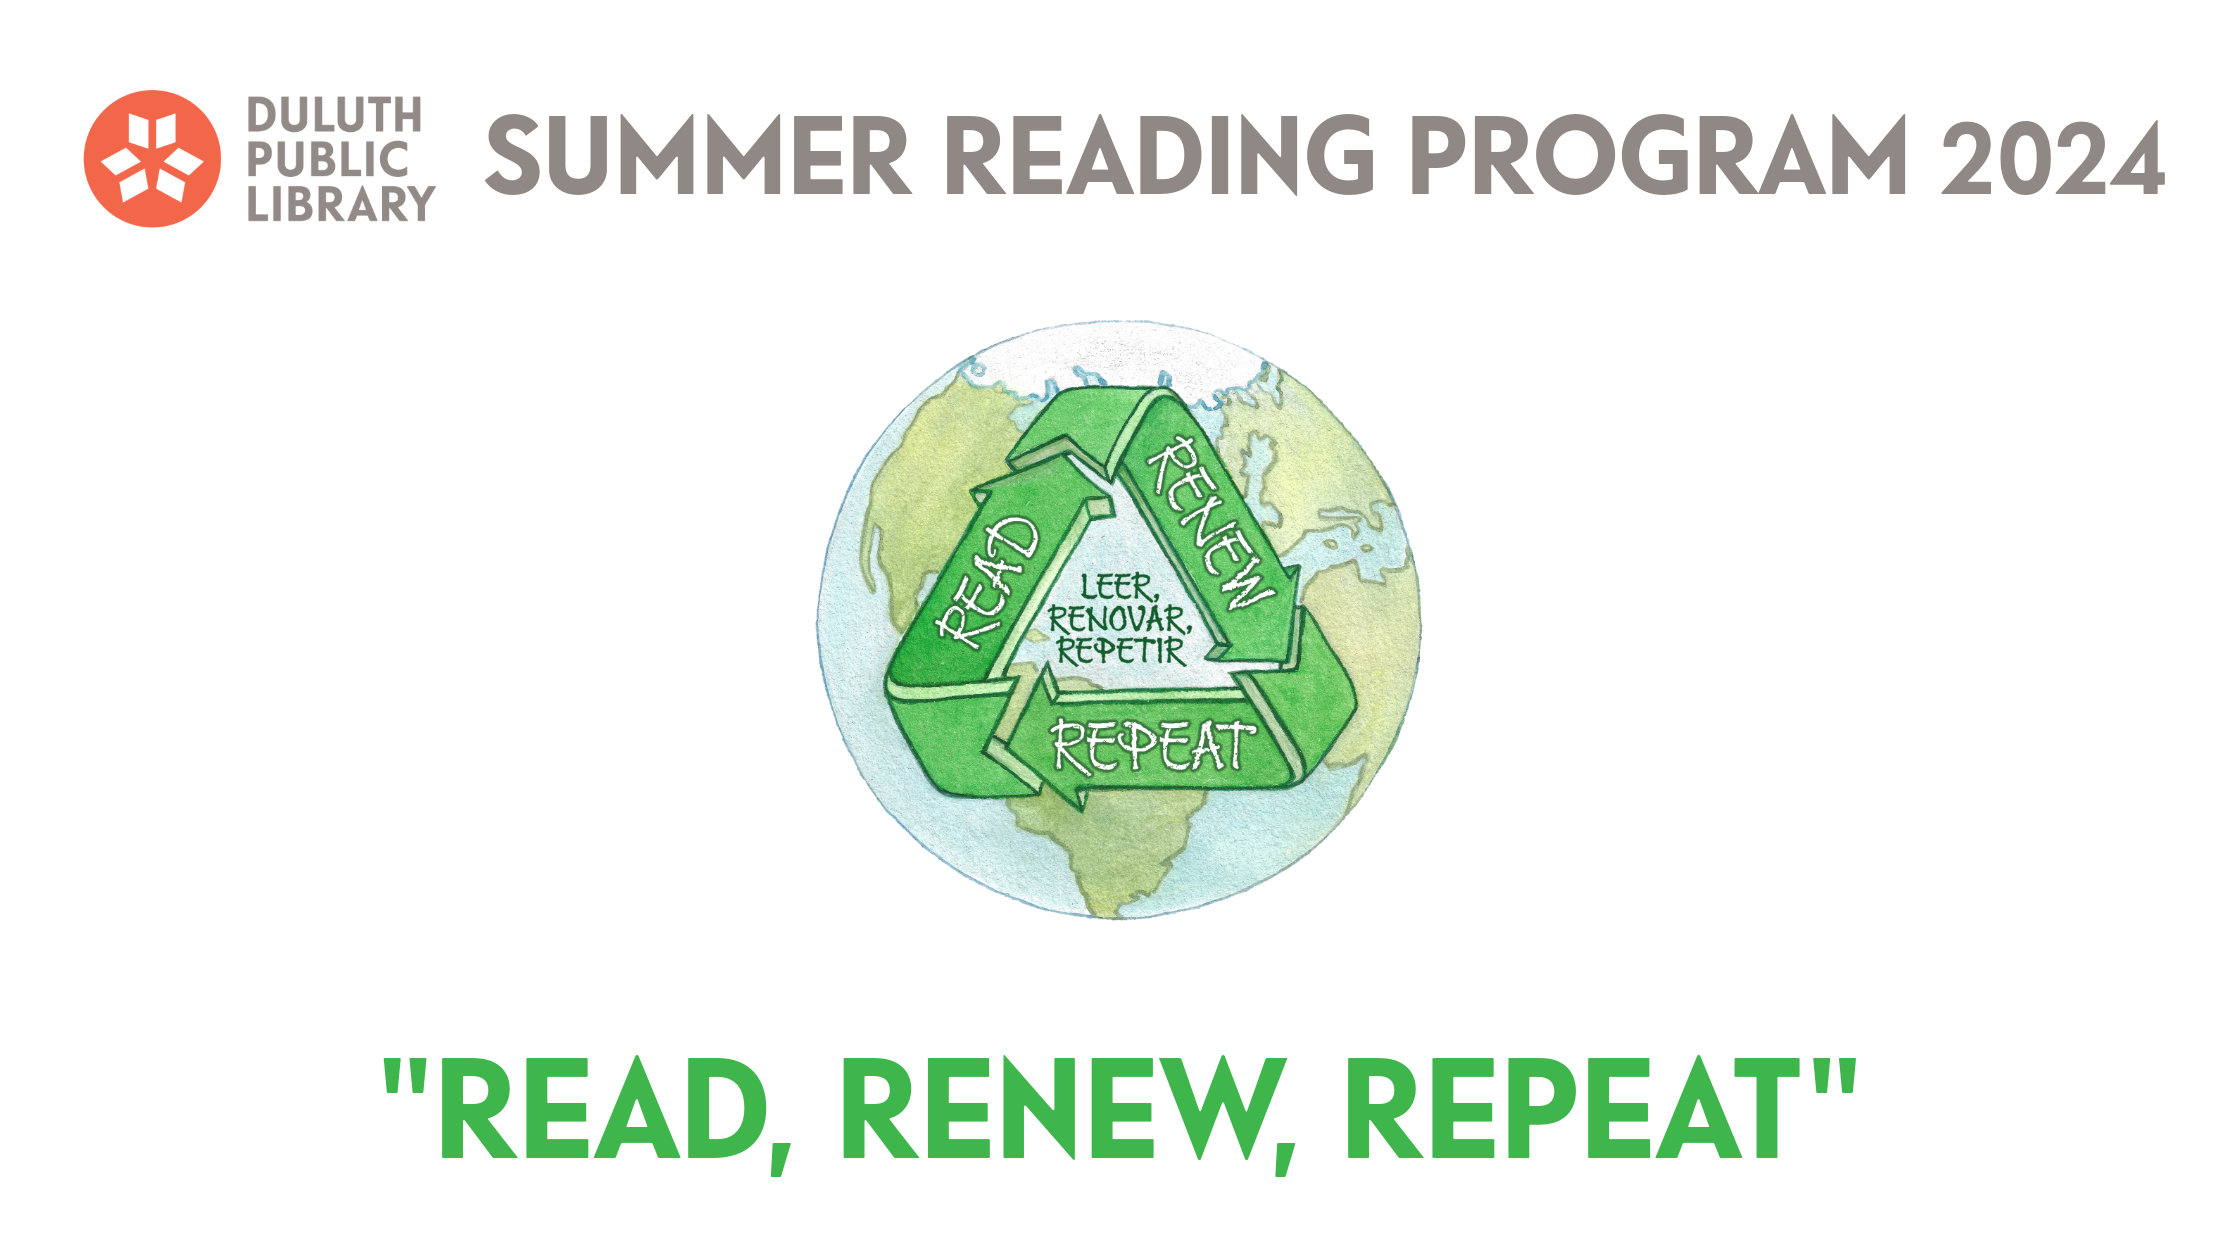 Summer reading program banner with a graphic by artist Jason Chin of the earth with "Read, Renew, Repeat" across it, with the Duluth Public Library Logo.